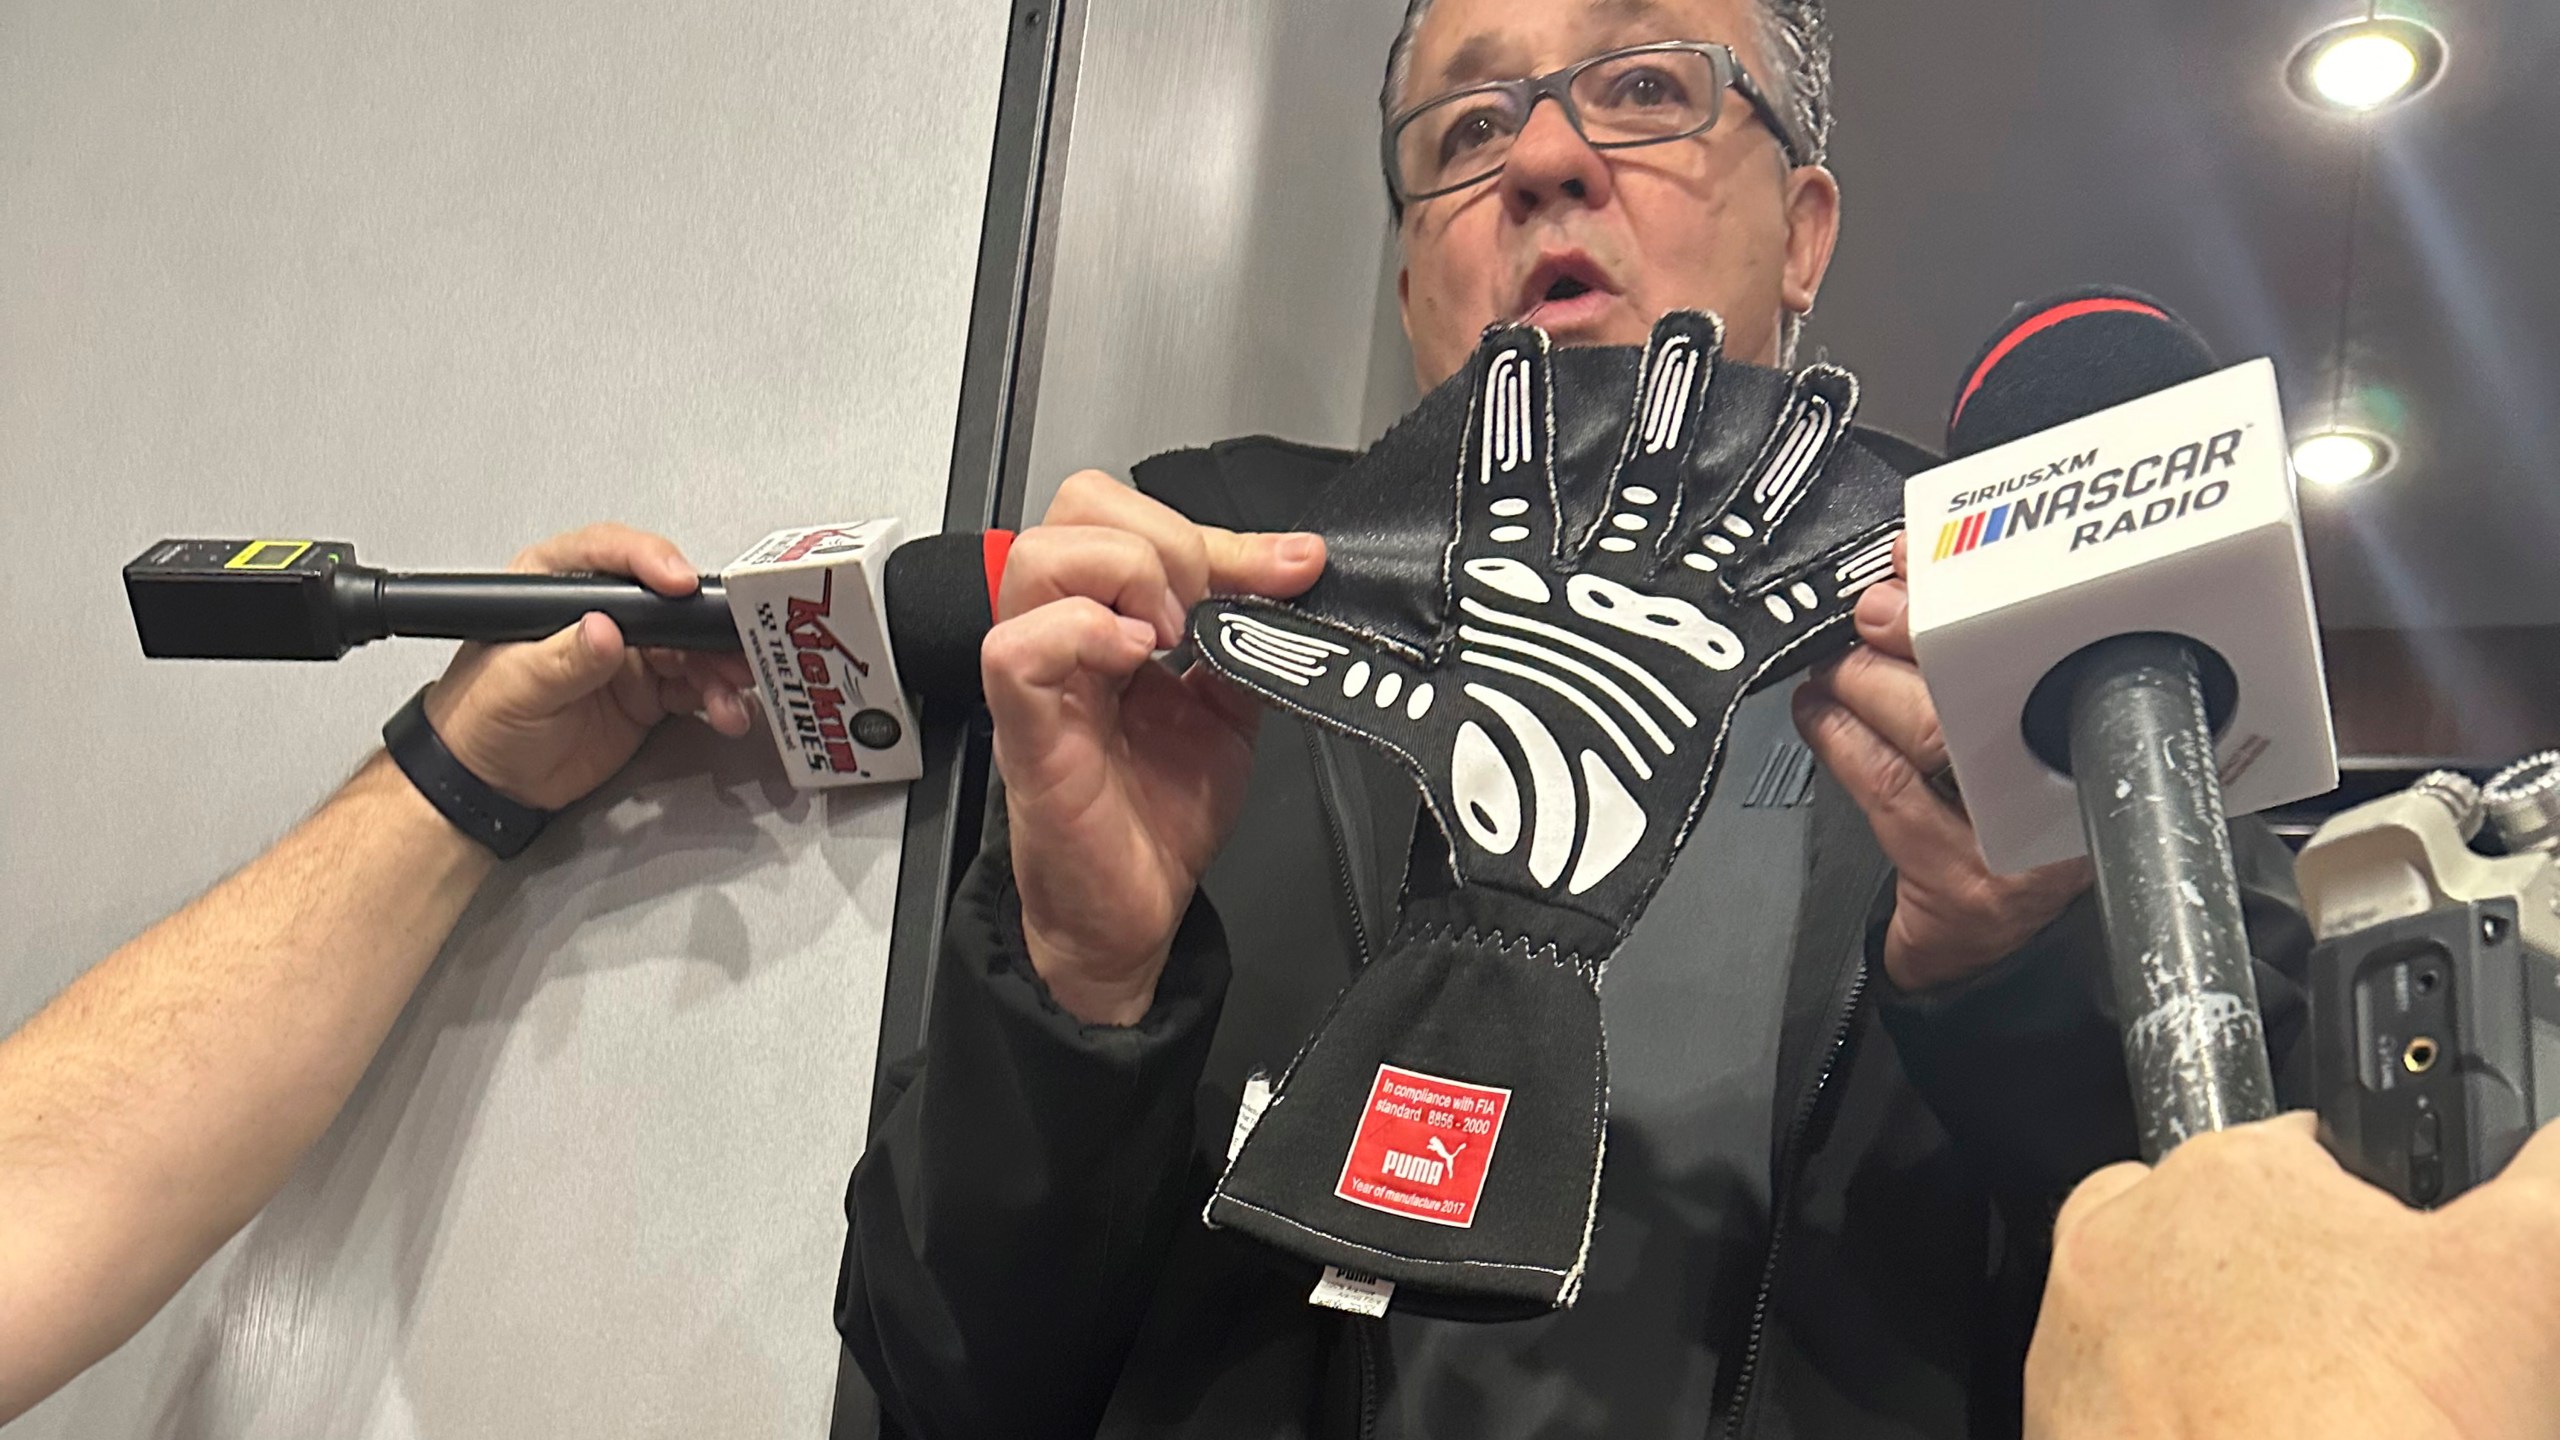 NASCAR Cup Series Managing Director Brad Moran shows reporters, Saturday, March 2, 2024, at Las Vegas Motor Speedway, the illegal glove Joey Logano of Team Penske was caught wearing during qualifying last week at Atlanta Motor Speedway. The webbing between the fingers that give the glove a “Spider-Man” appearance are used to block air when a driver puts his hand out the window during qualifying. (AP Photo/Jenna Fryer)